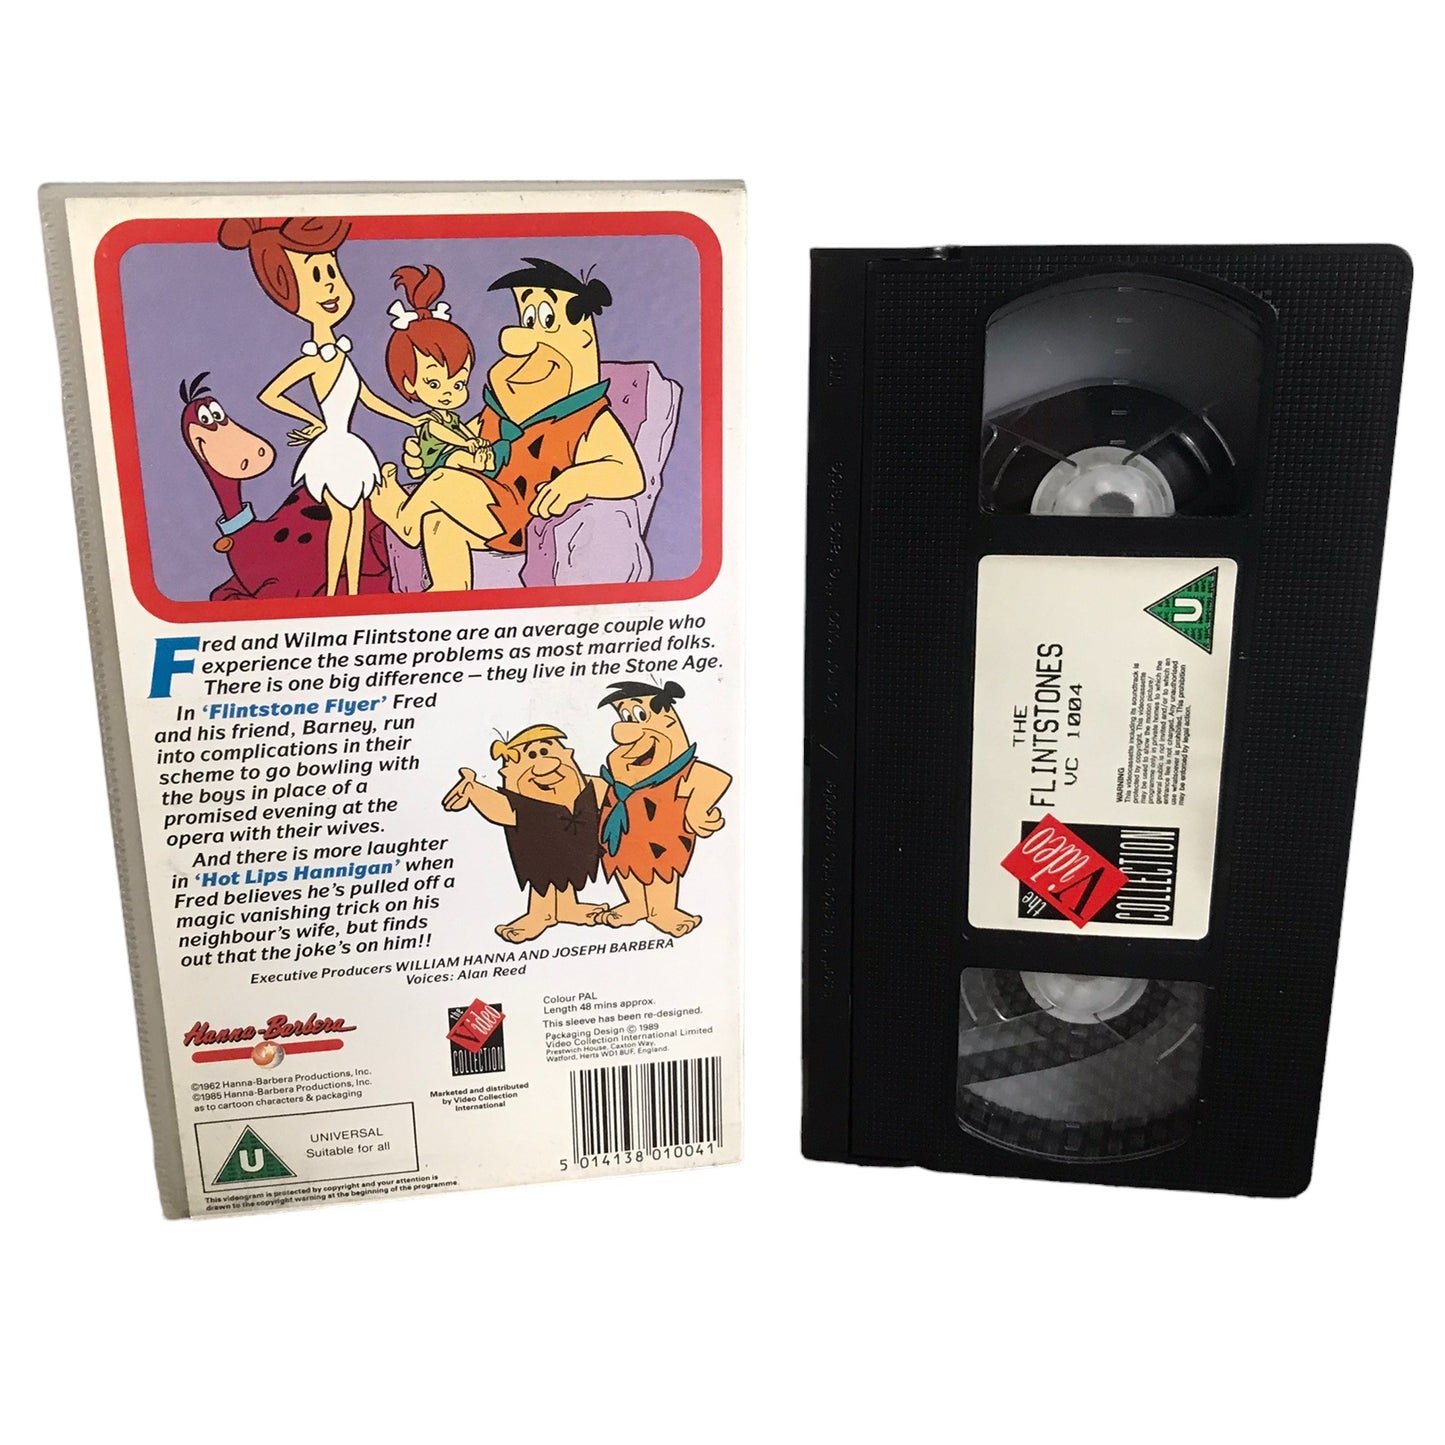 The Flintstones - Flintstone Flyer - Rosie O'Donnell - The Video Collection - Childrens - Pal - VHS-